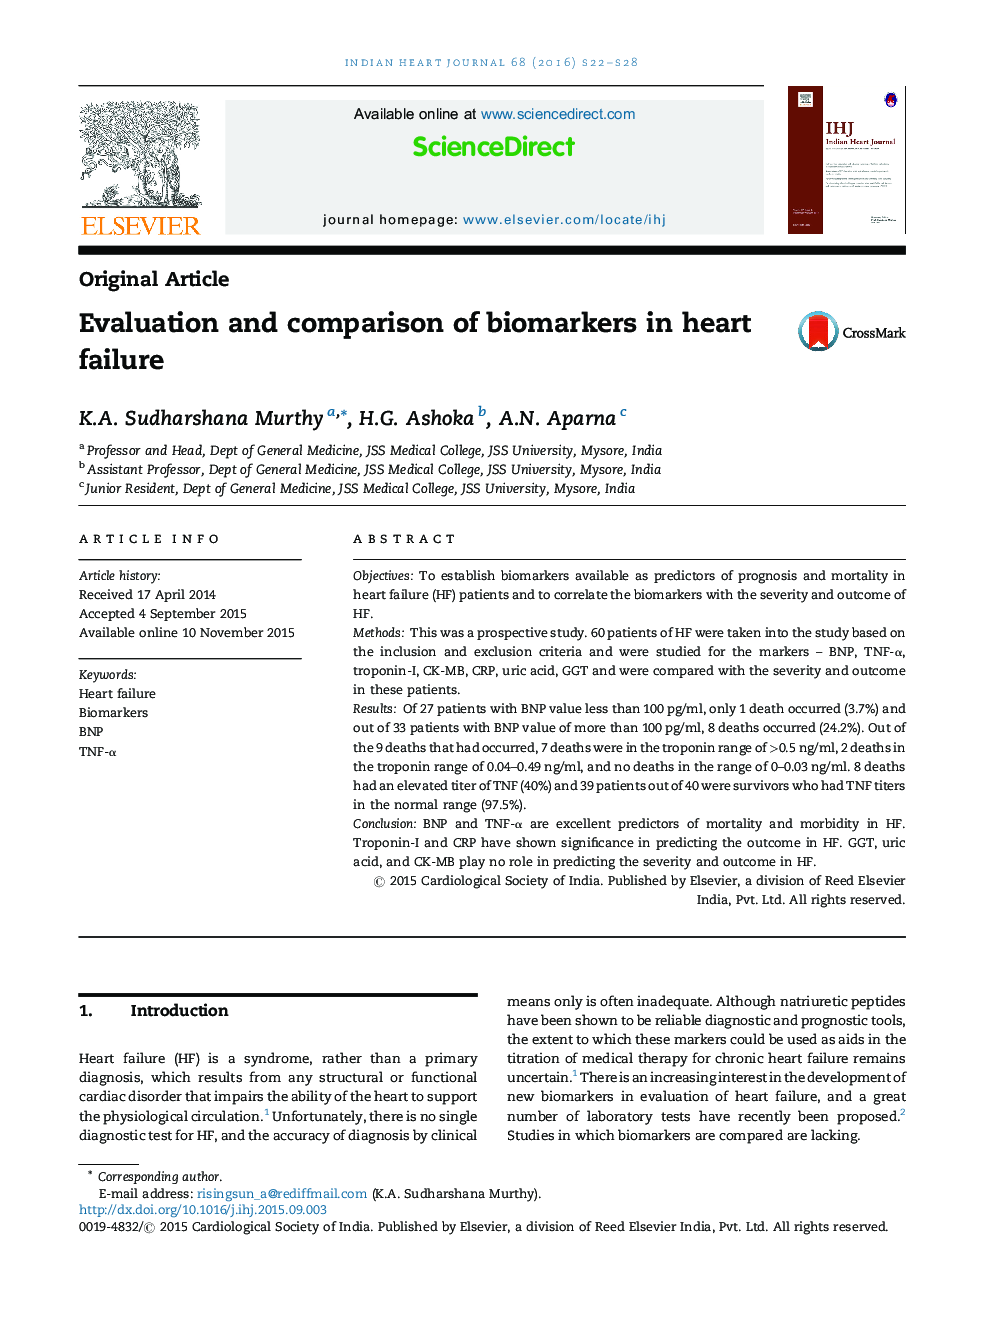 Evaluation and comparison of biomarkers in heart failure